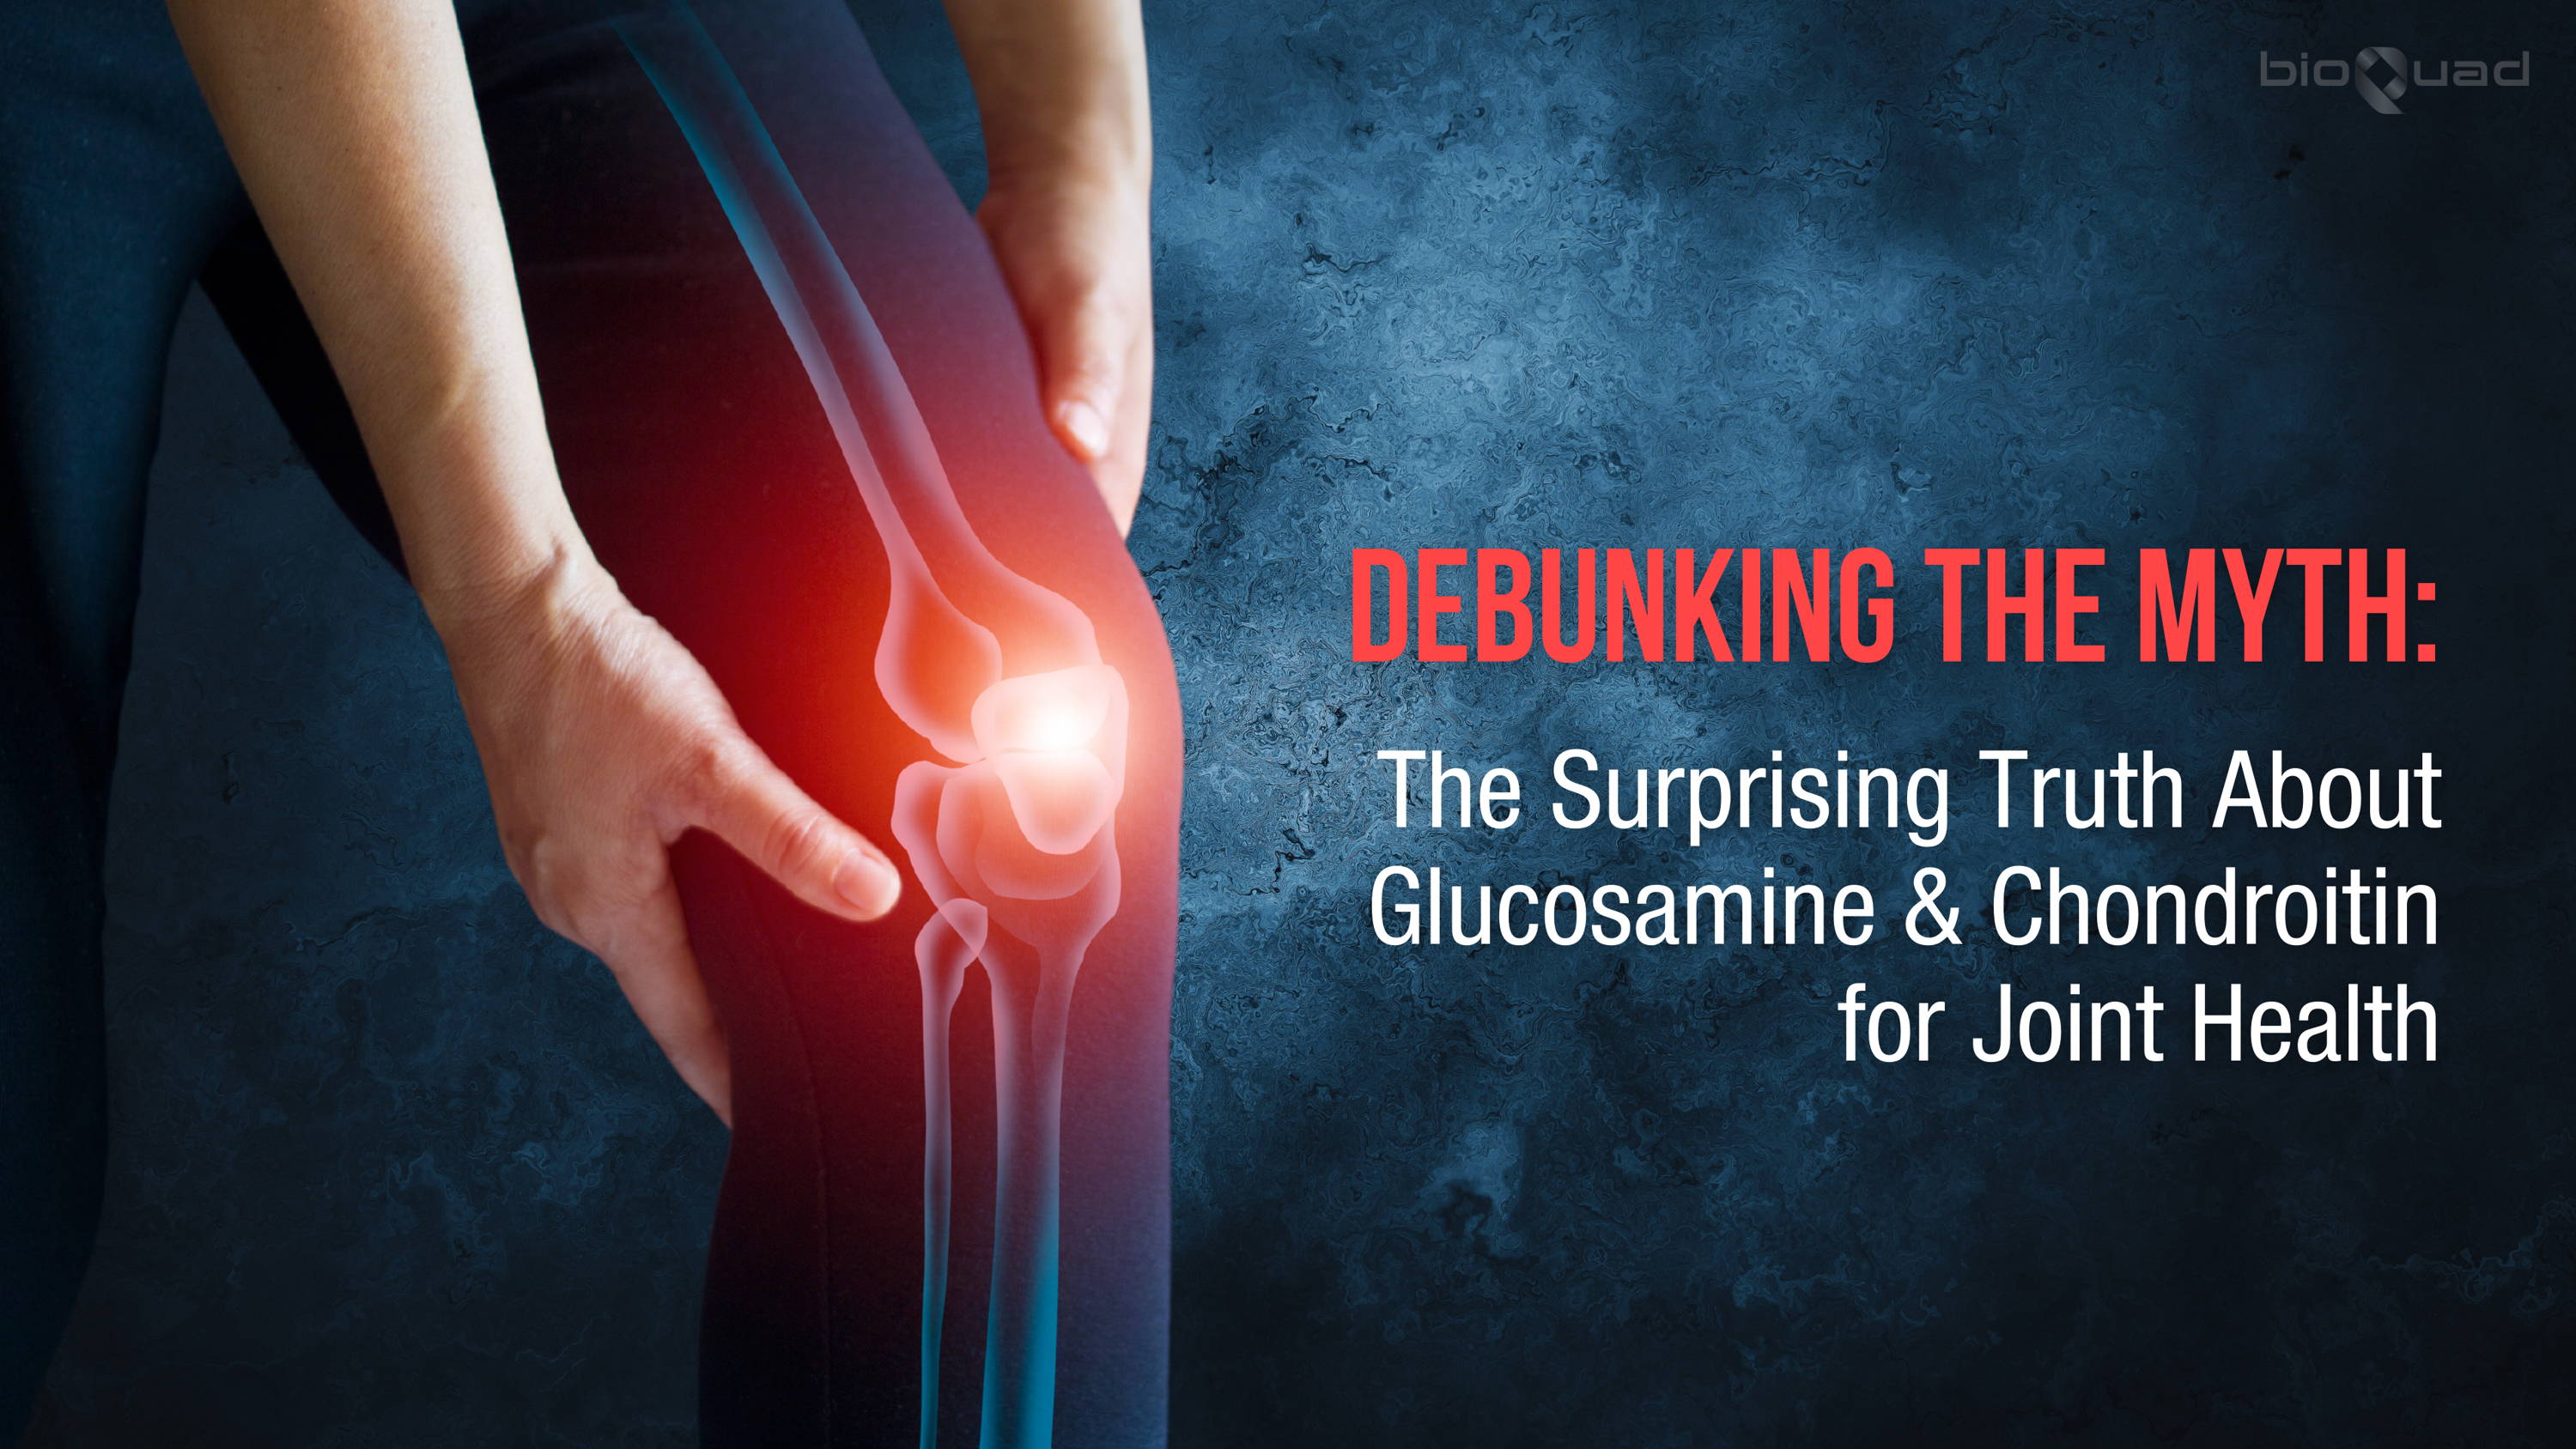 Graphic illustration highlighting joint pain with text 'DEBUNKING THE MYTH: The Surprising Truth About Glucosamine & Chondroitin for Joint Health' by bioQuad.